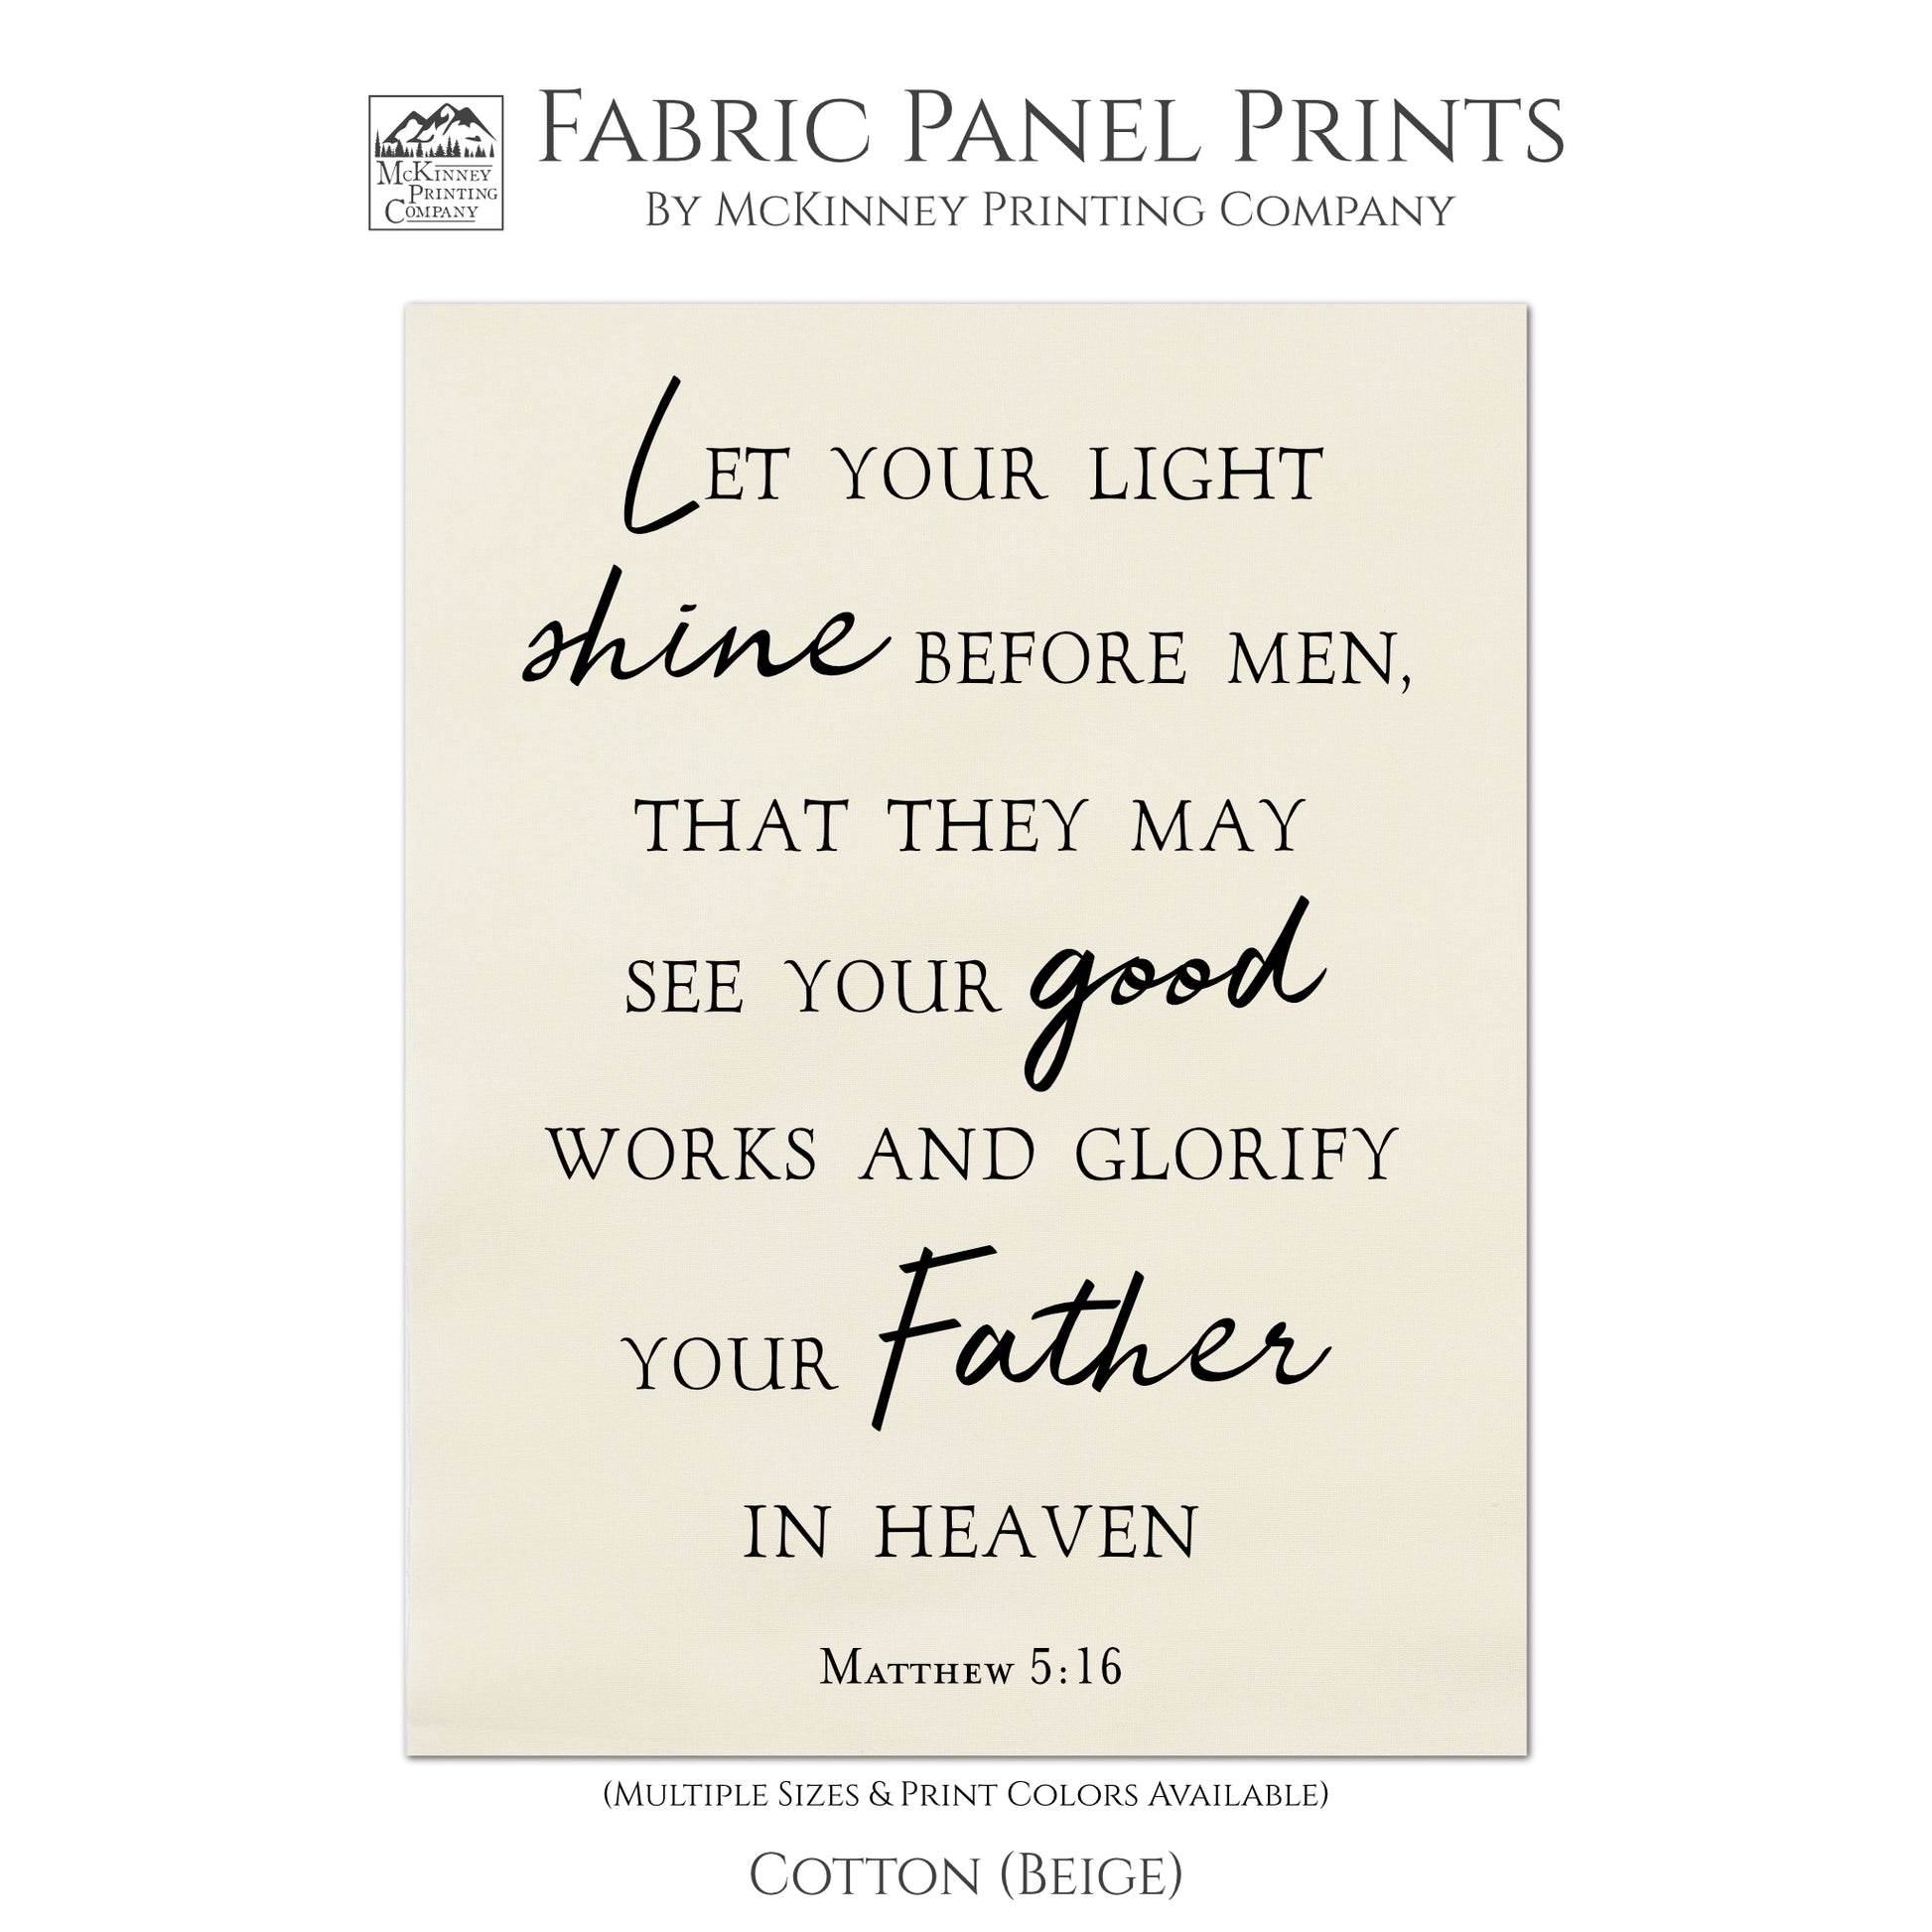 Let your light shine before men, that they may see your good works and glorify your Father in heaven. - Matthew 5 16, Fabric Panel Print - Cotton